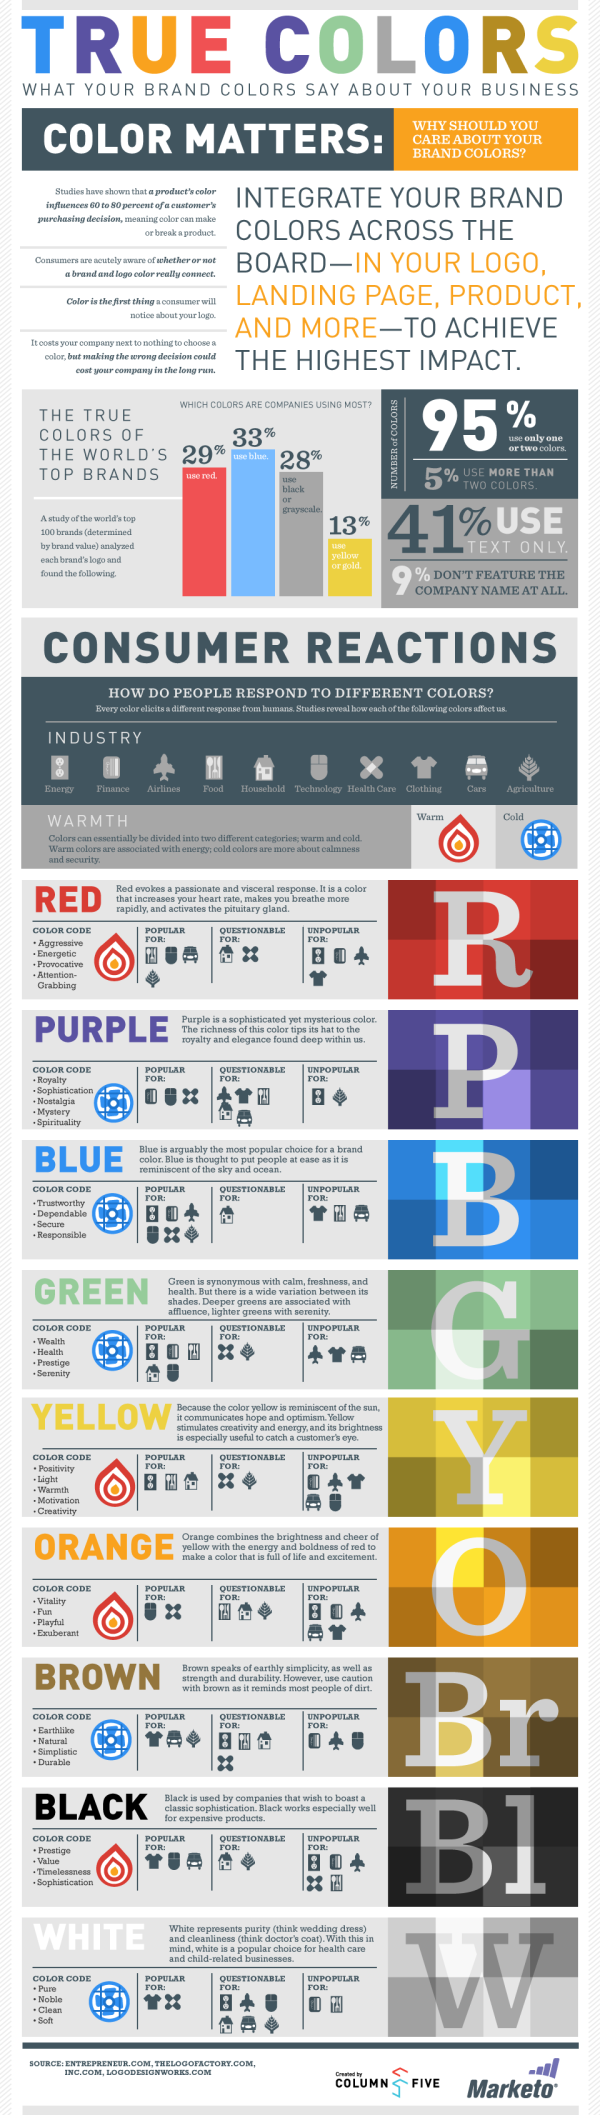 True Colors: What Your Brand Colors Say About Your Business infographic